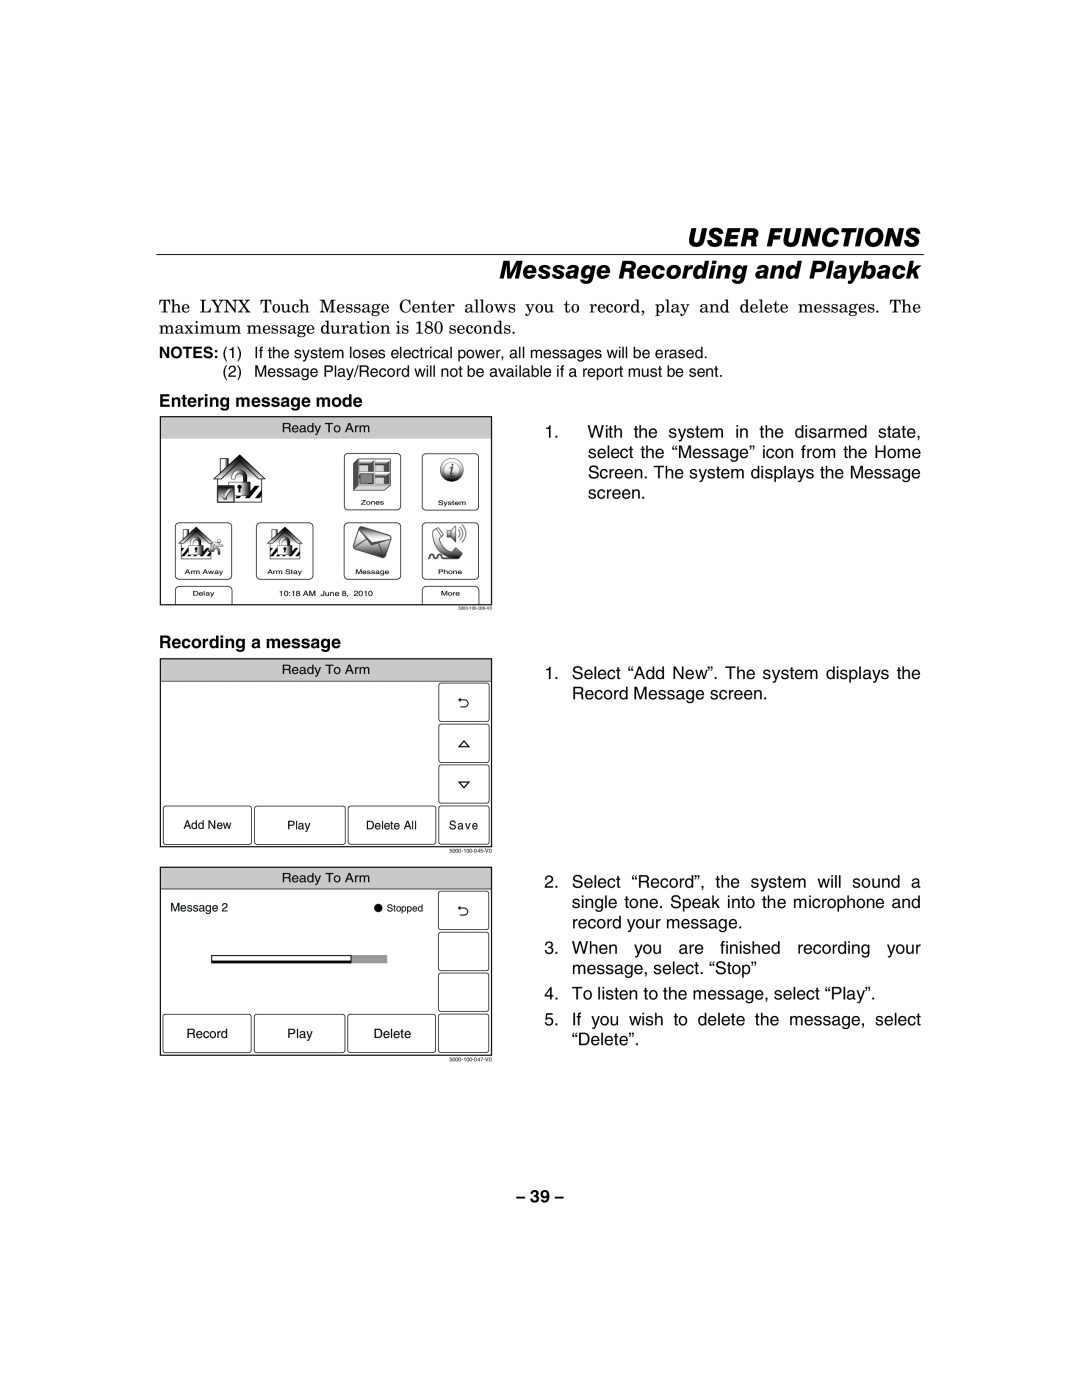 Honeywell 800-06894 manual USER FUNCTIONS Message Recording and Playback, Entering message mode, Recording a message 